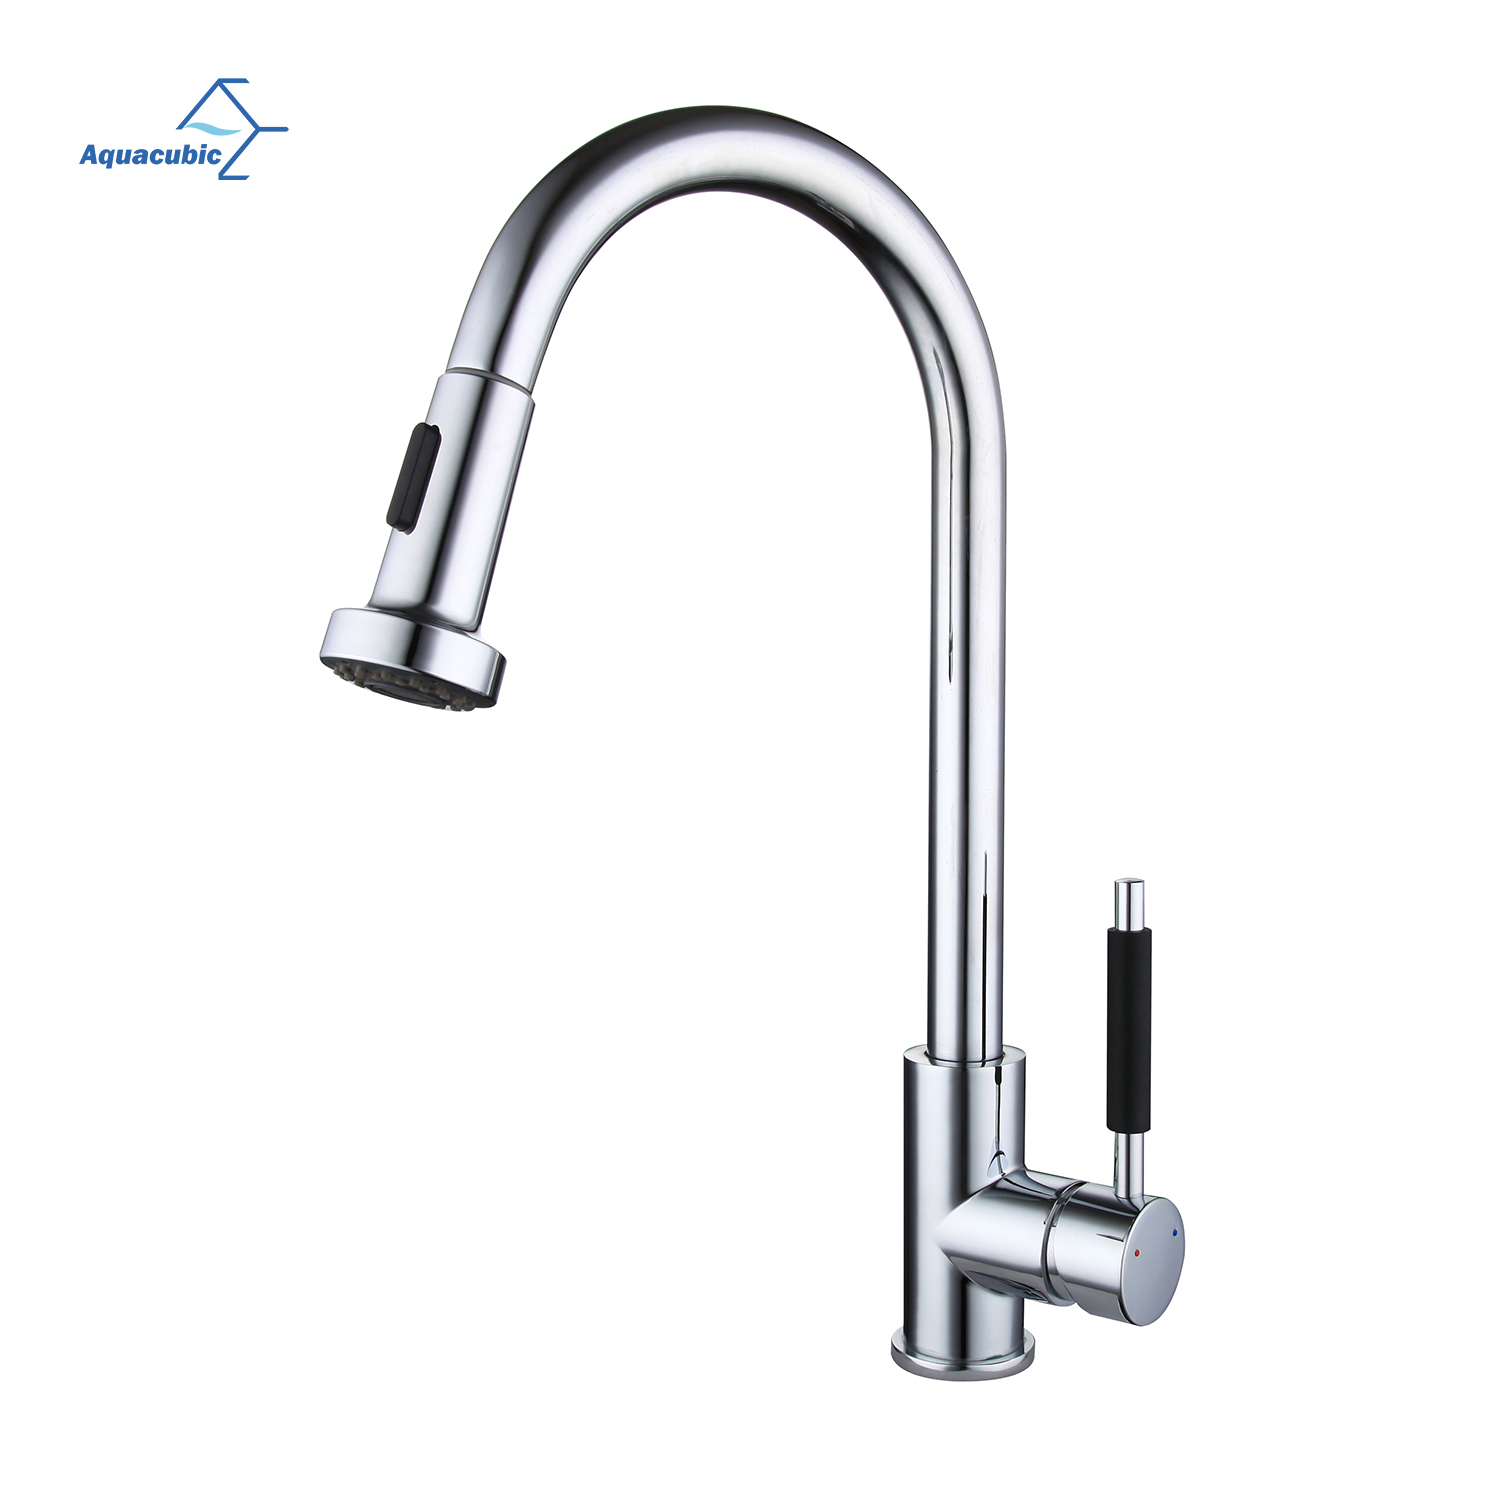 Aquacubic Lead-free Waterway cUPC Sanitary Deck mount Washbasin Pull Out Kitchen Faucet